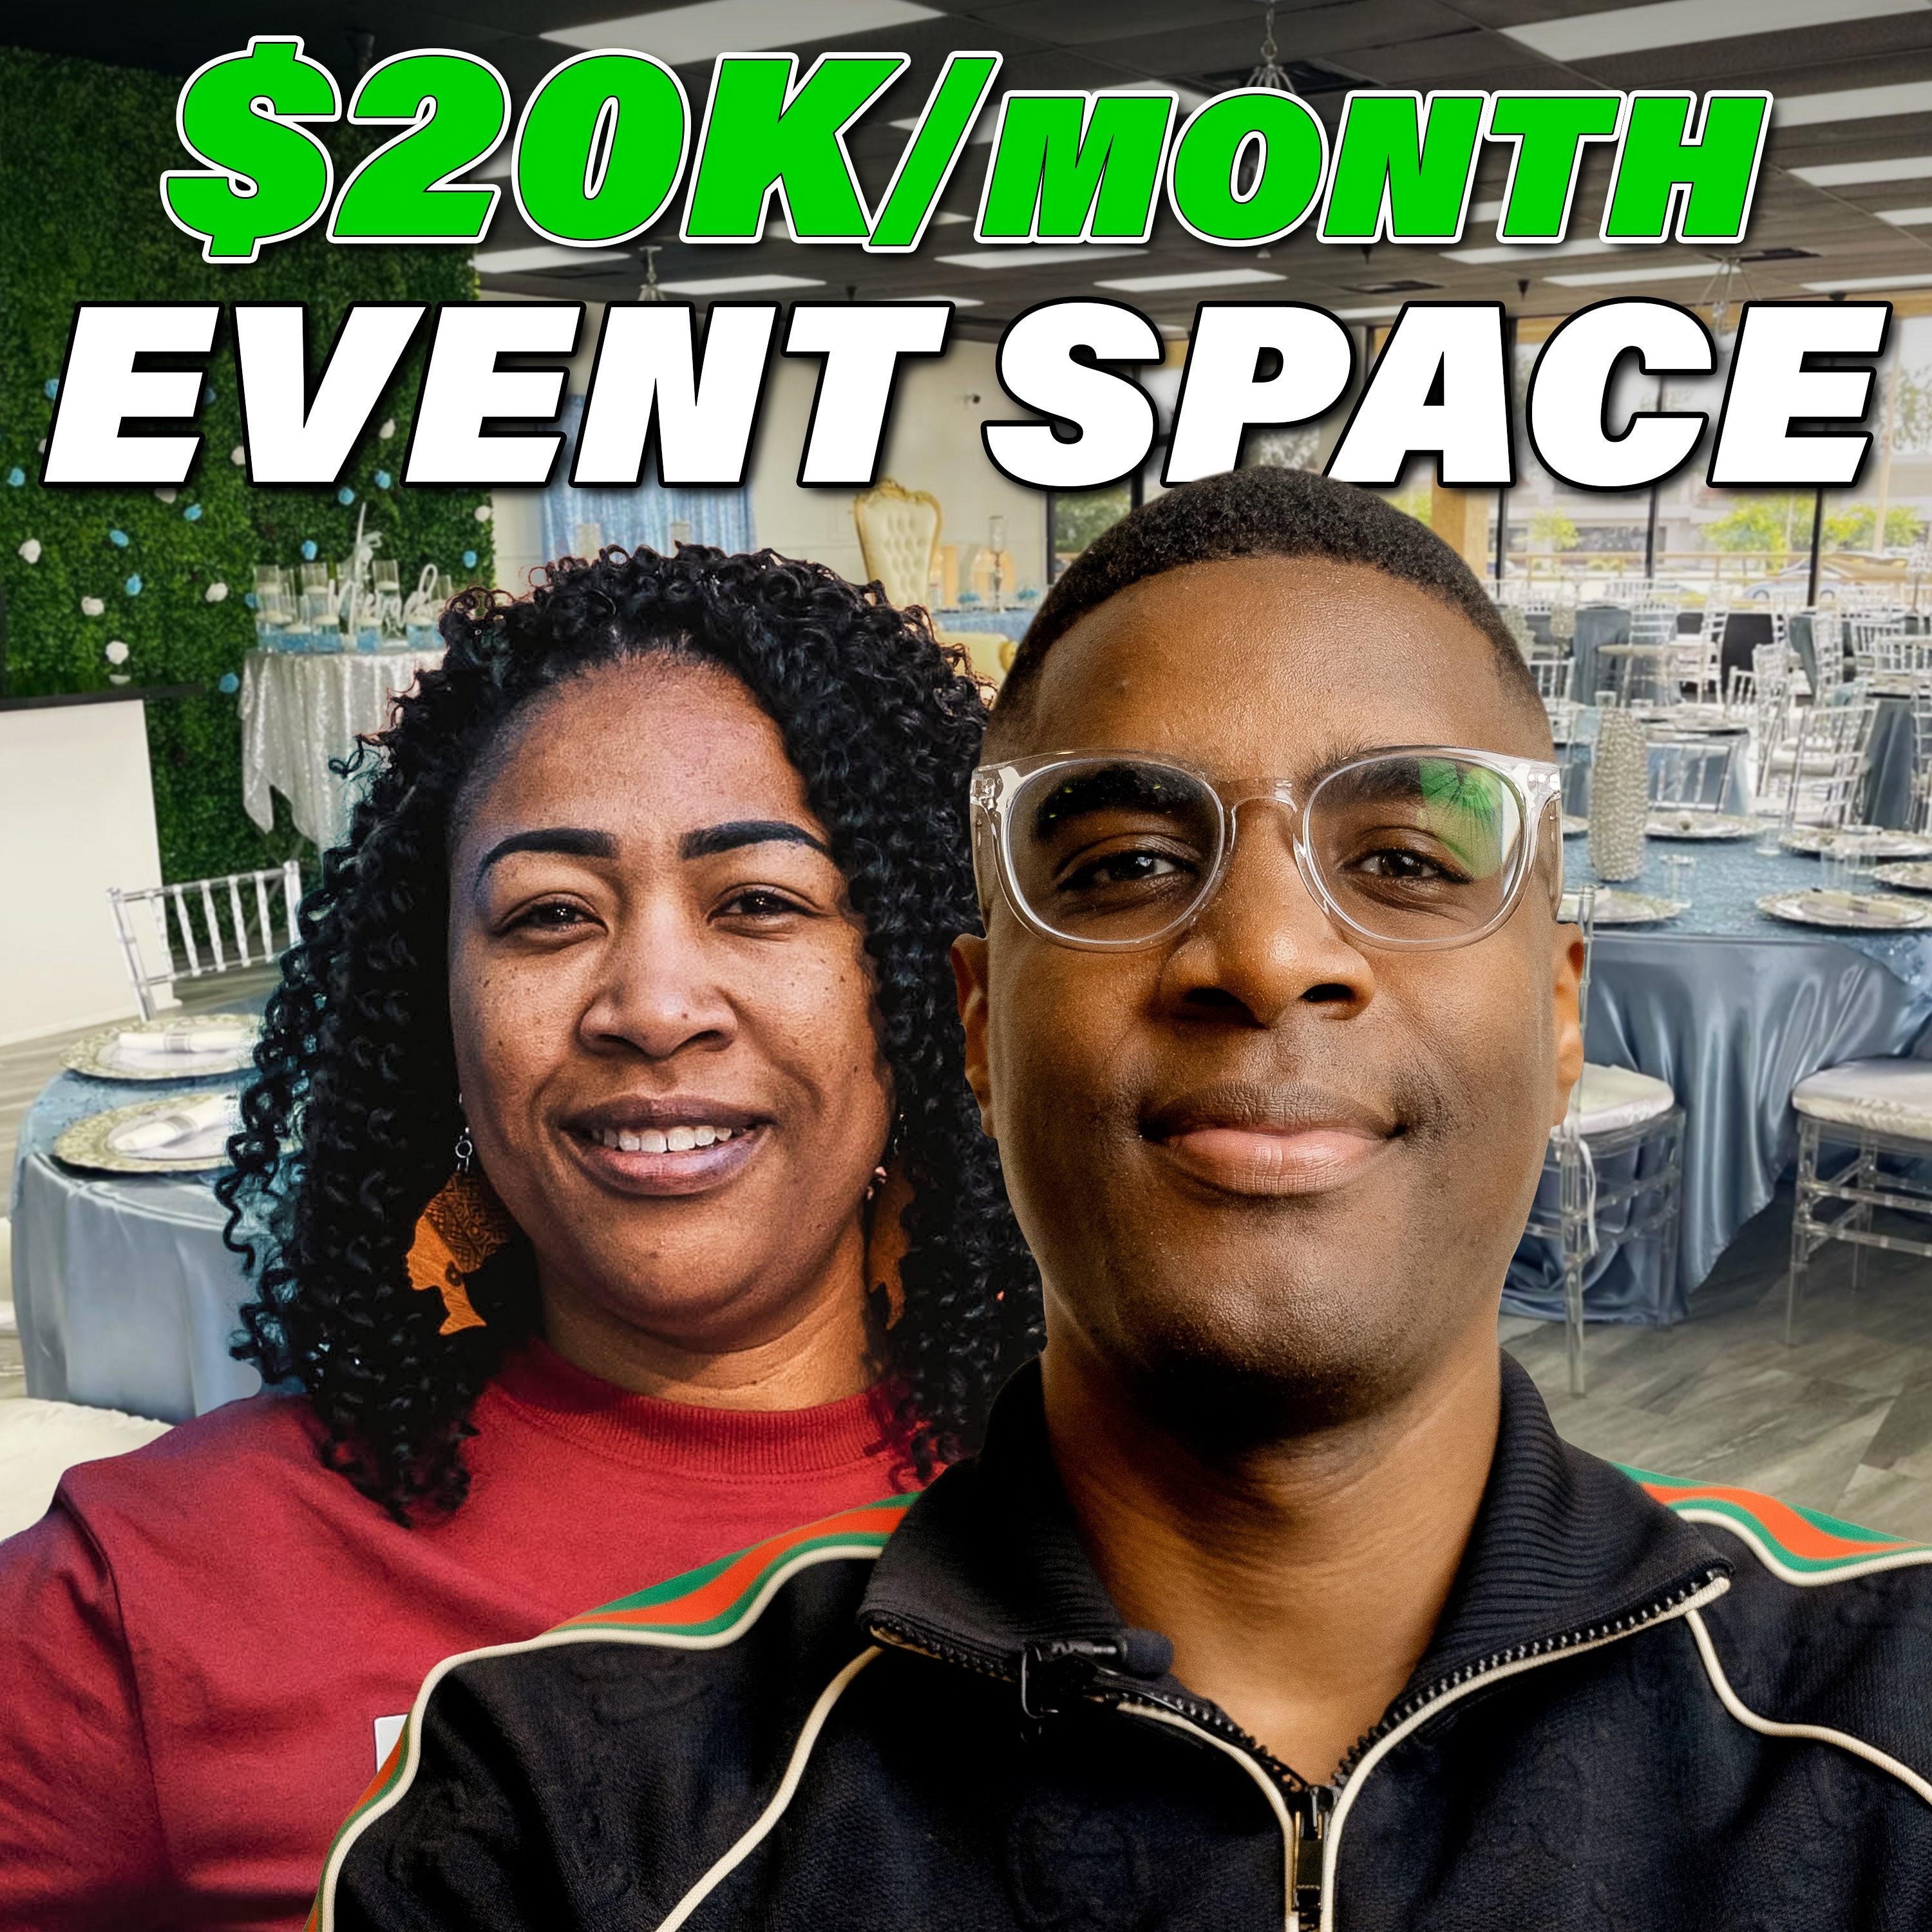 Double Your Income: The Visionary Strategy That Made Her $20K/Month with Her Event Space